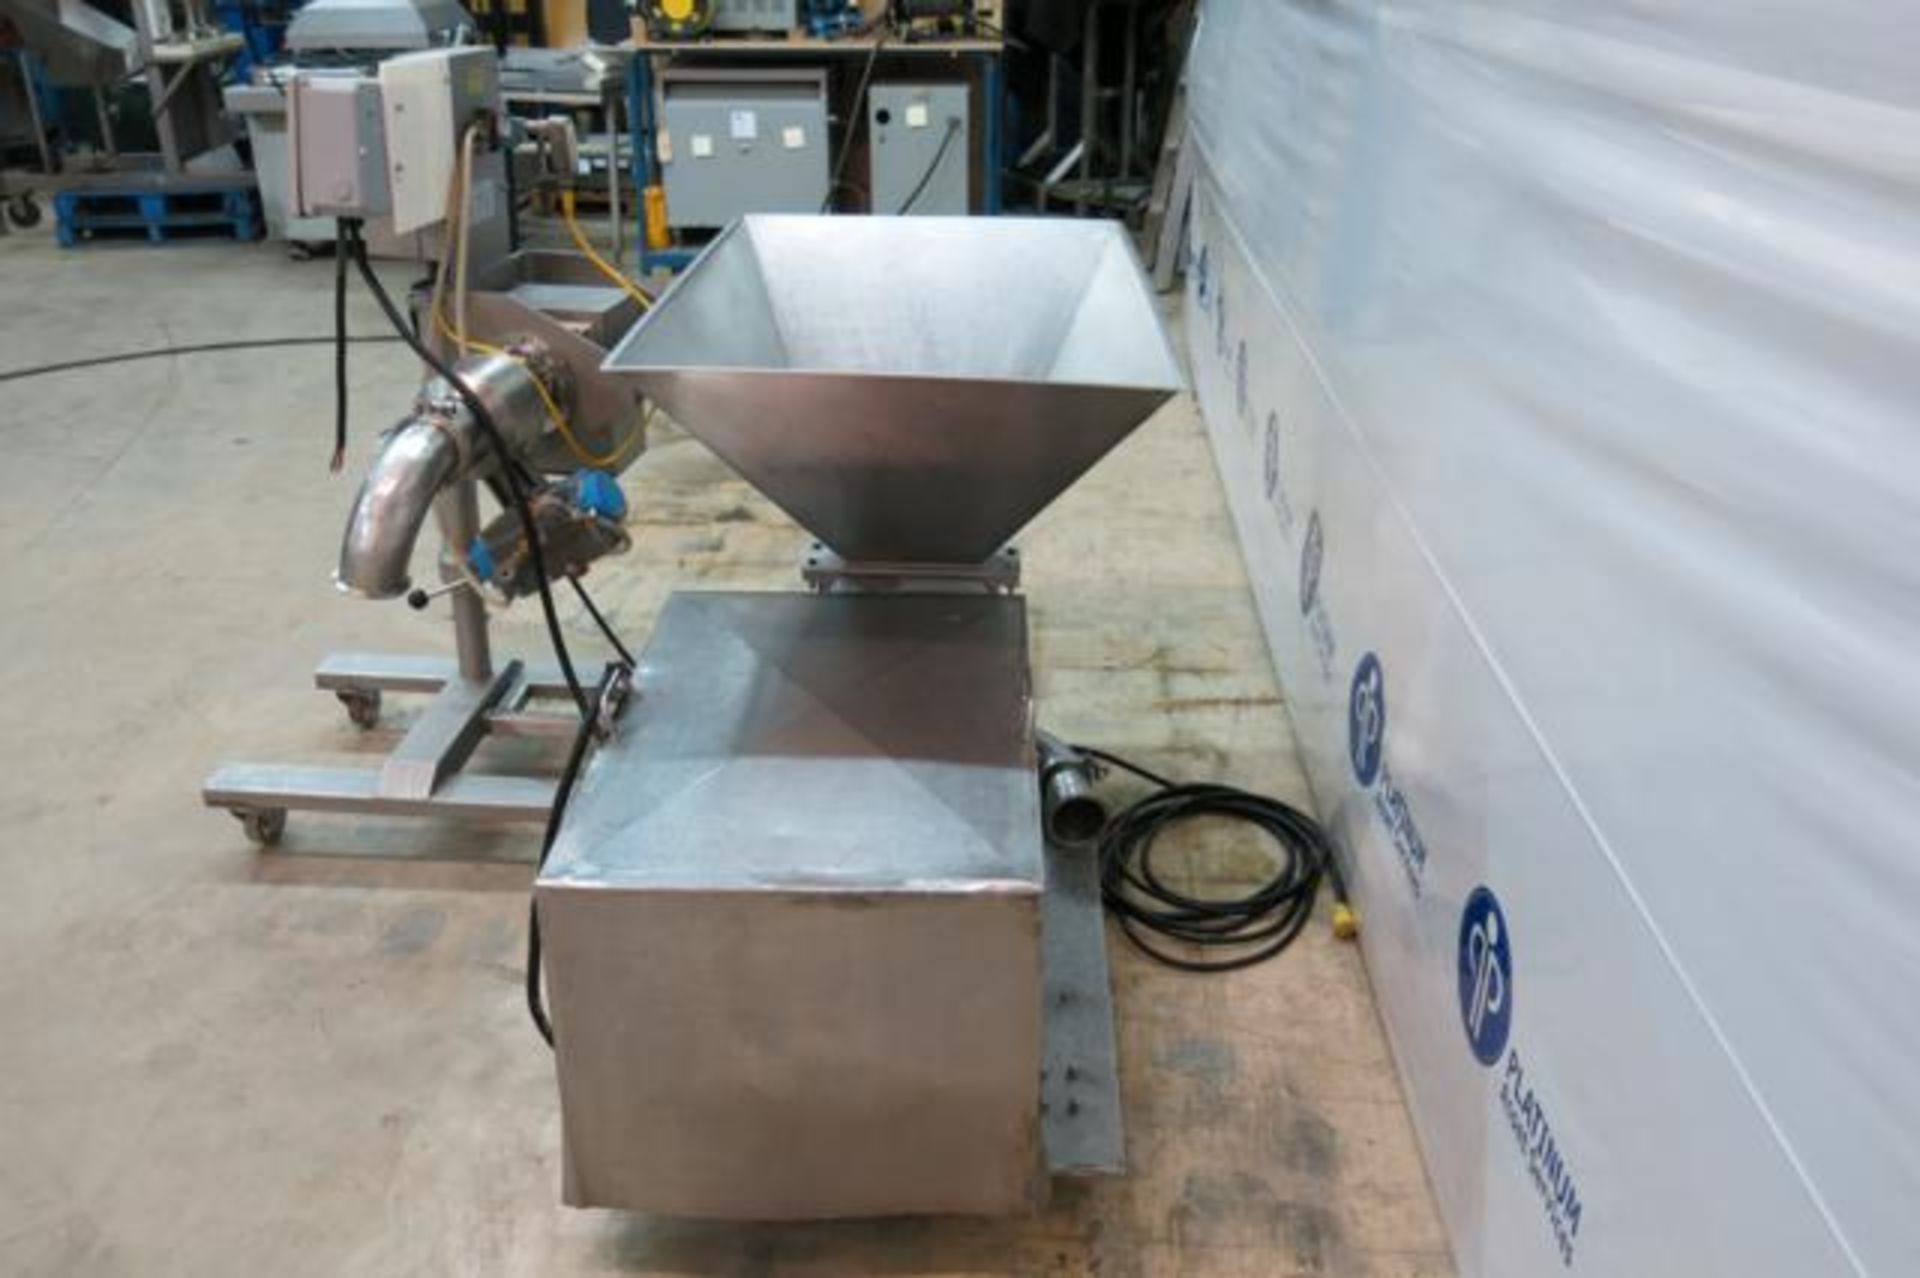 SIPROMAC, 600A, STAINLESS STEEL, DOUBLE CHAMBER VACUUM PACKAGING MACHINE, 2009, S/N 9676 - Image 7 of 9